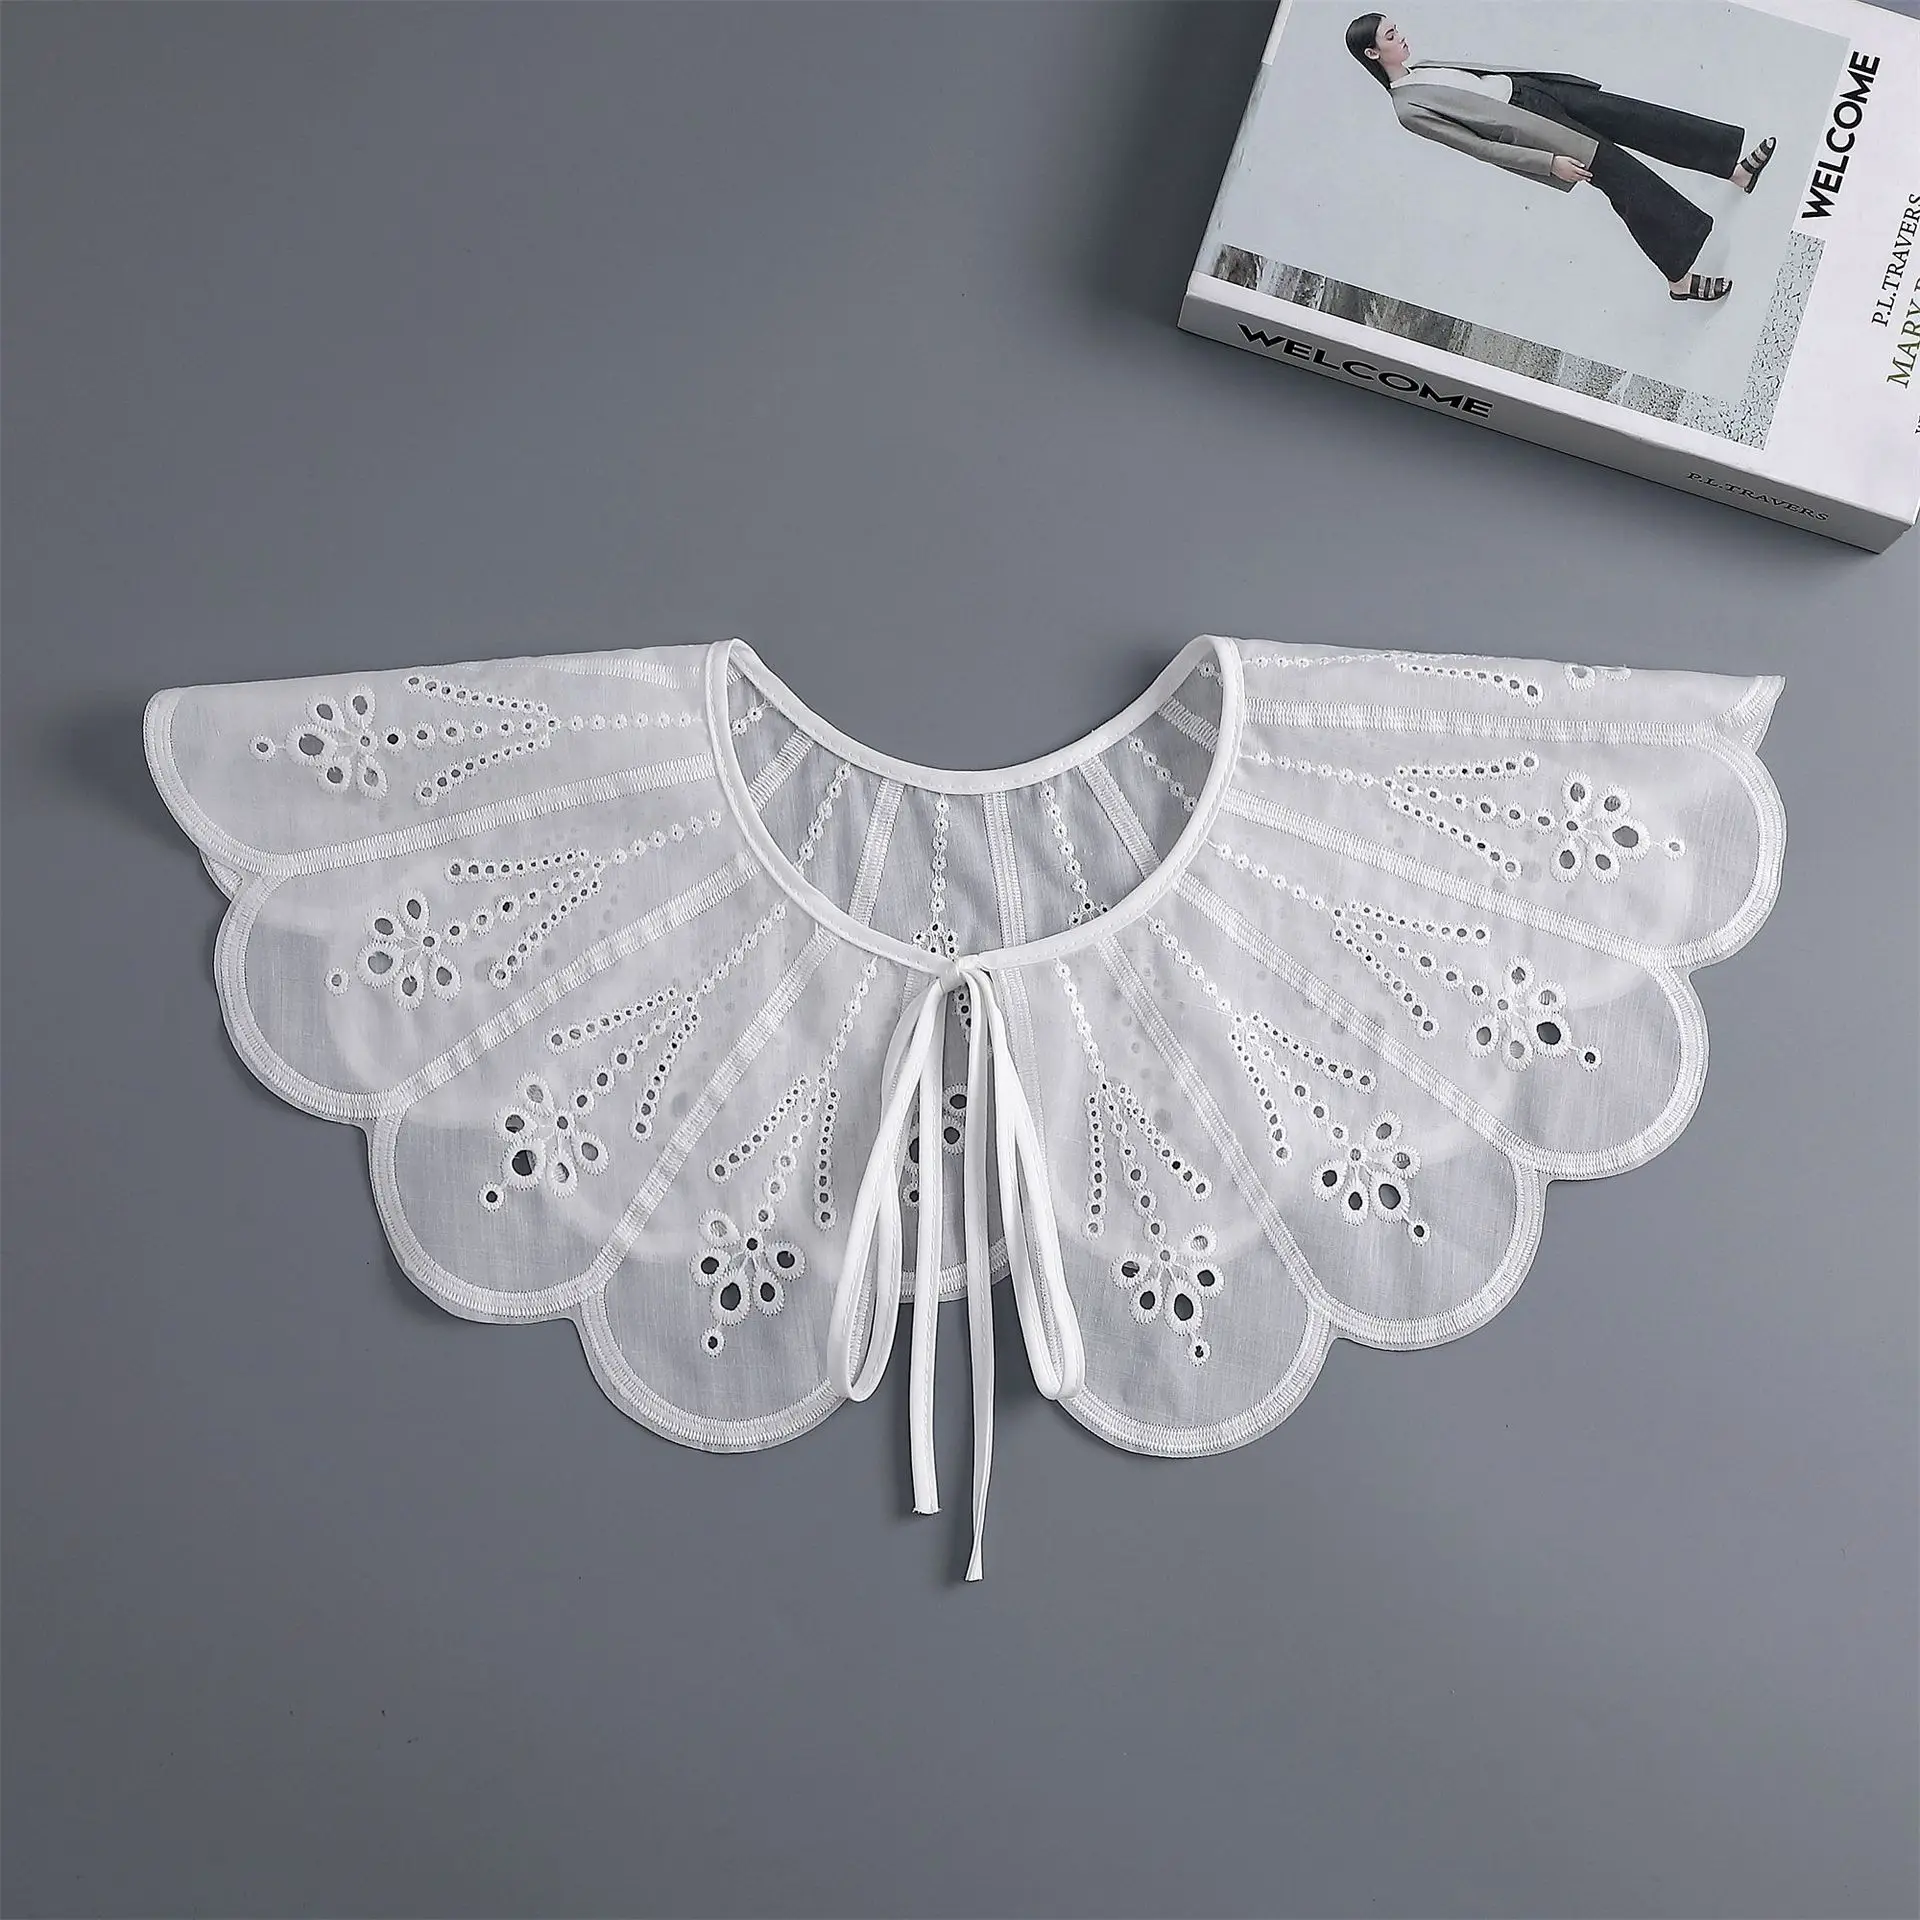 

New White Fake Collar Shawls for Women Cloud Shoulder Removable Shirt Detachable Collars Girls Lace Shoulder Wraps Shawl